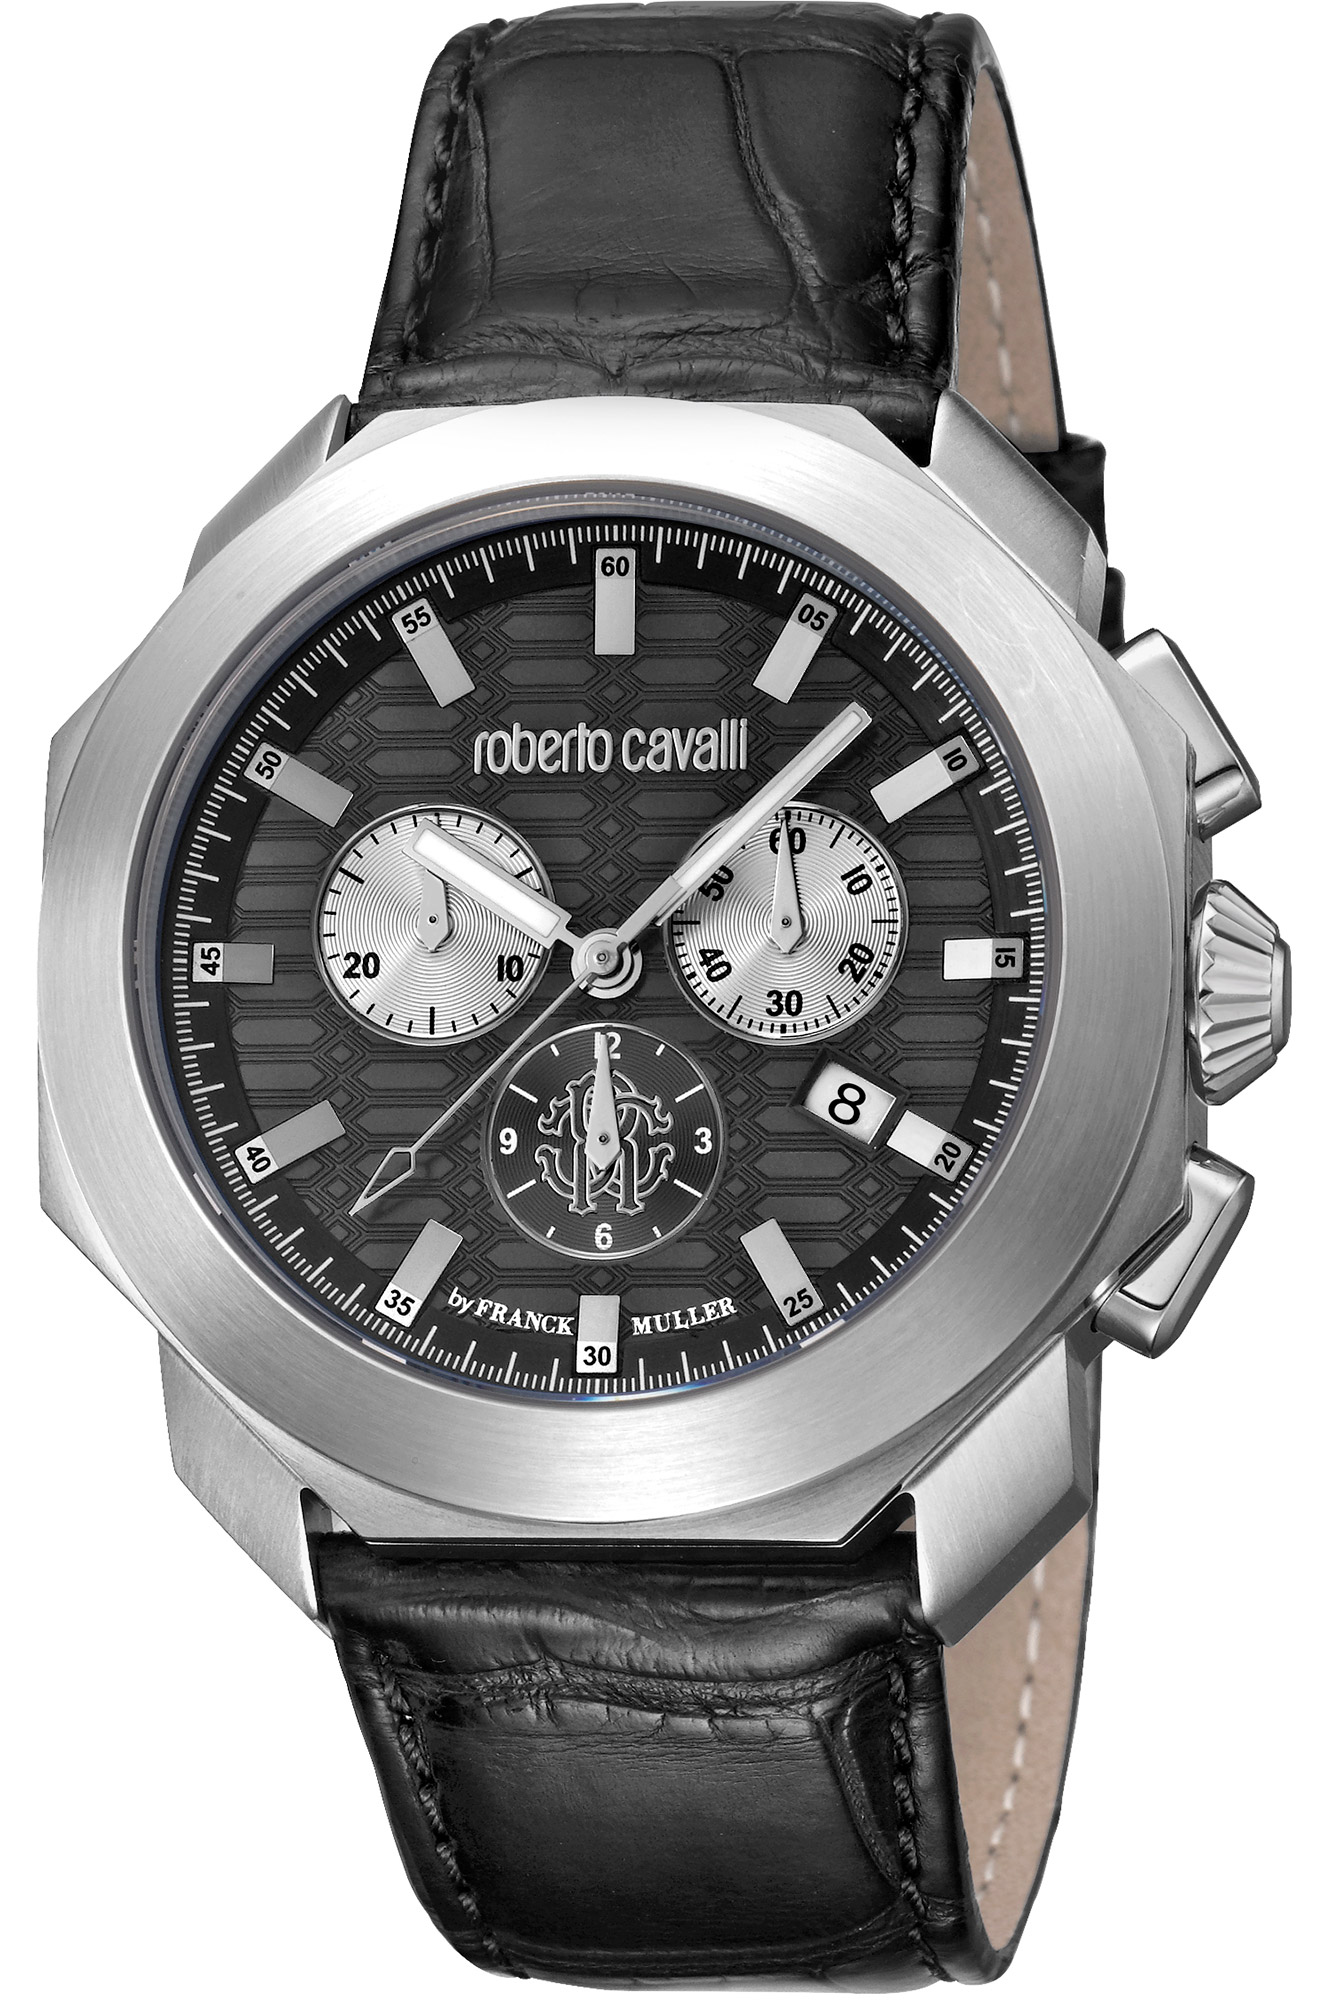 Roberto Cavalli by Franck MullerRV1G044L0021 - Aion Time